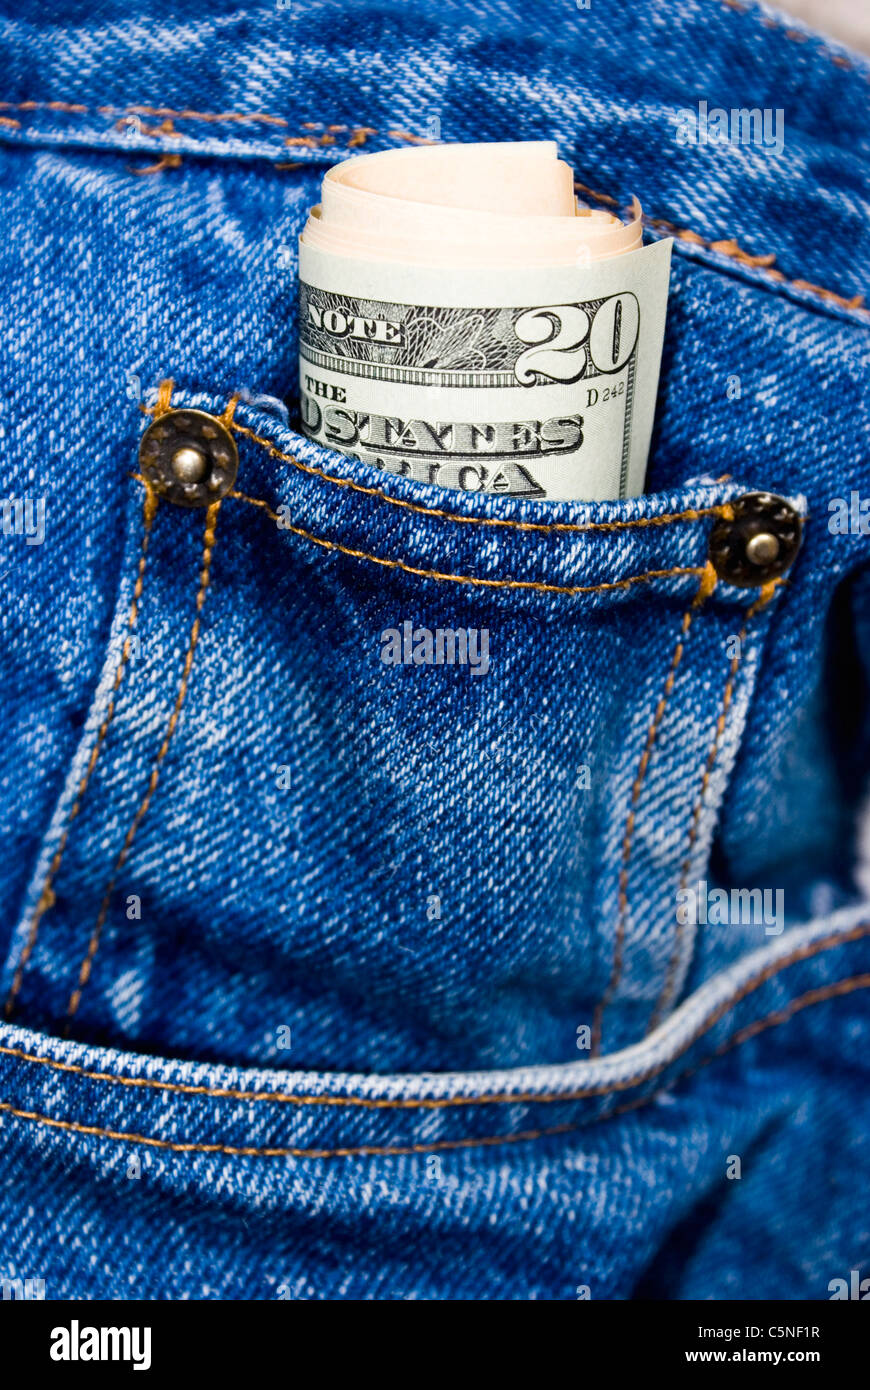 A roll of 20 dollar bills in pocket of blue jeans Stock Photo